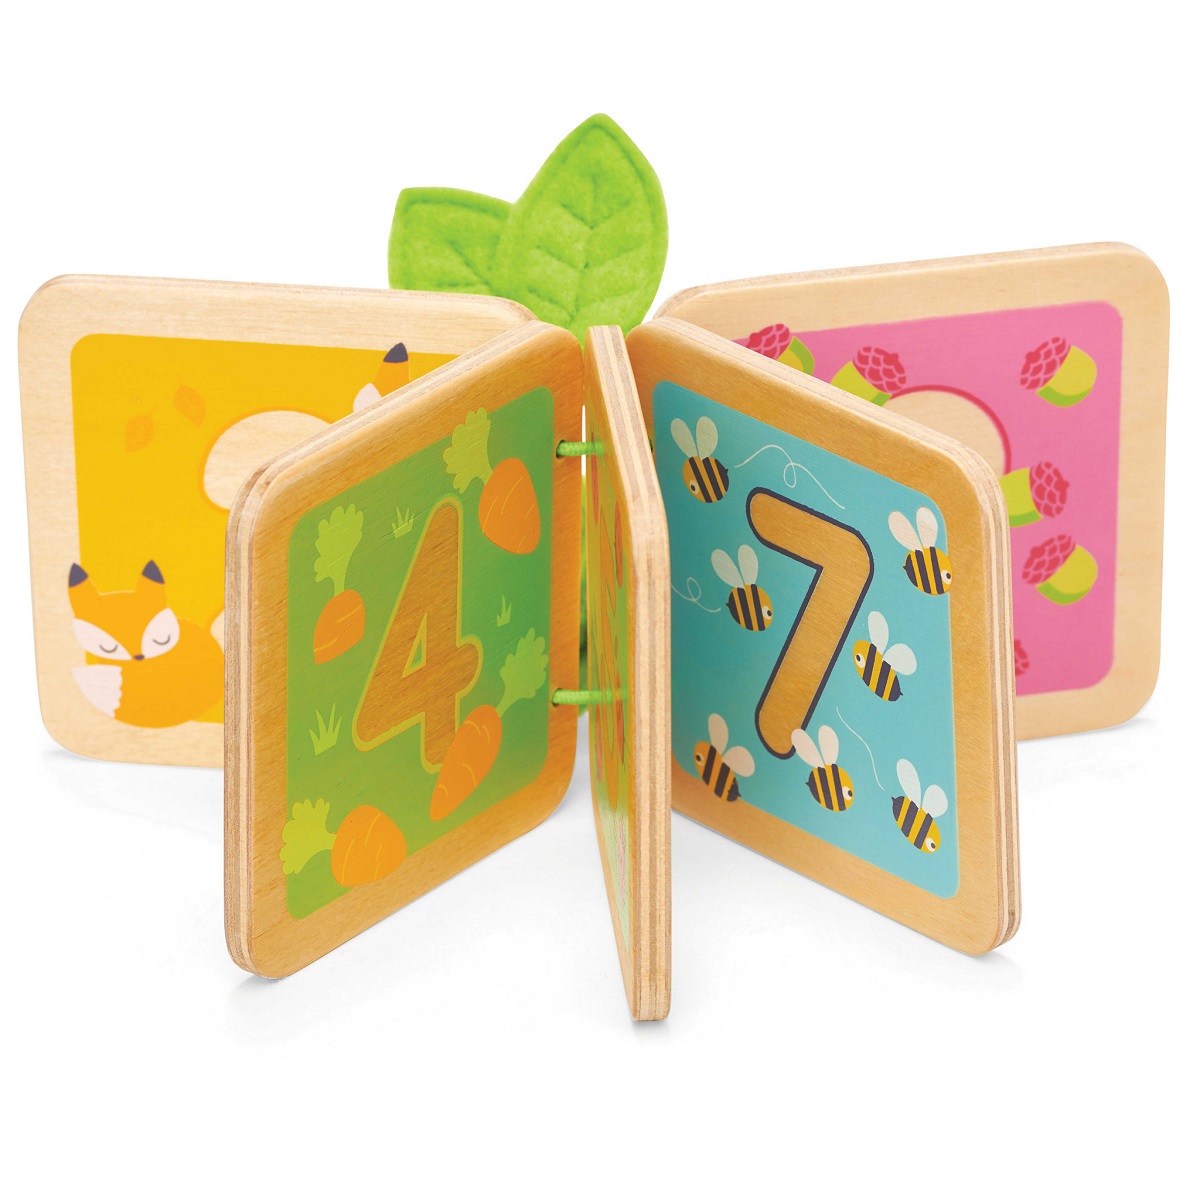 Baby and Toddler - 123 Numbers Wooden Book